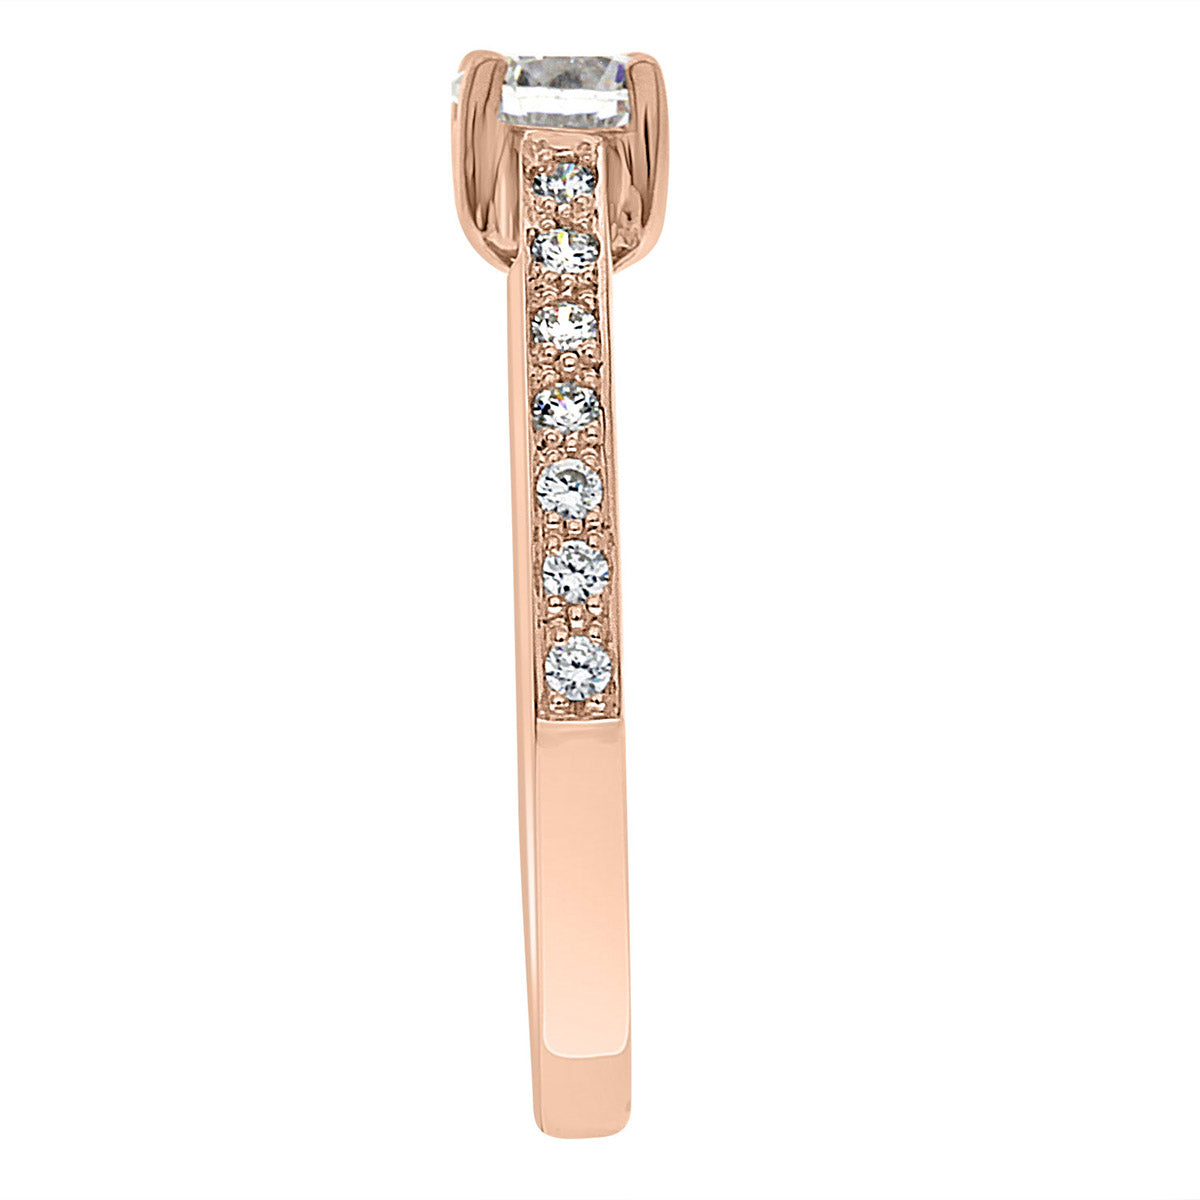 Princess Cut Bezel Ring set in rose gold and standing upright ina side view